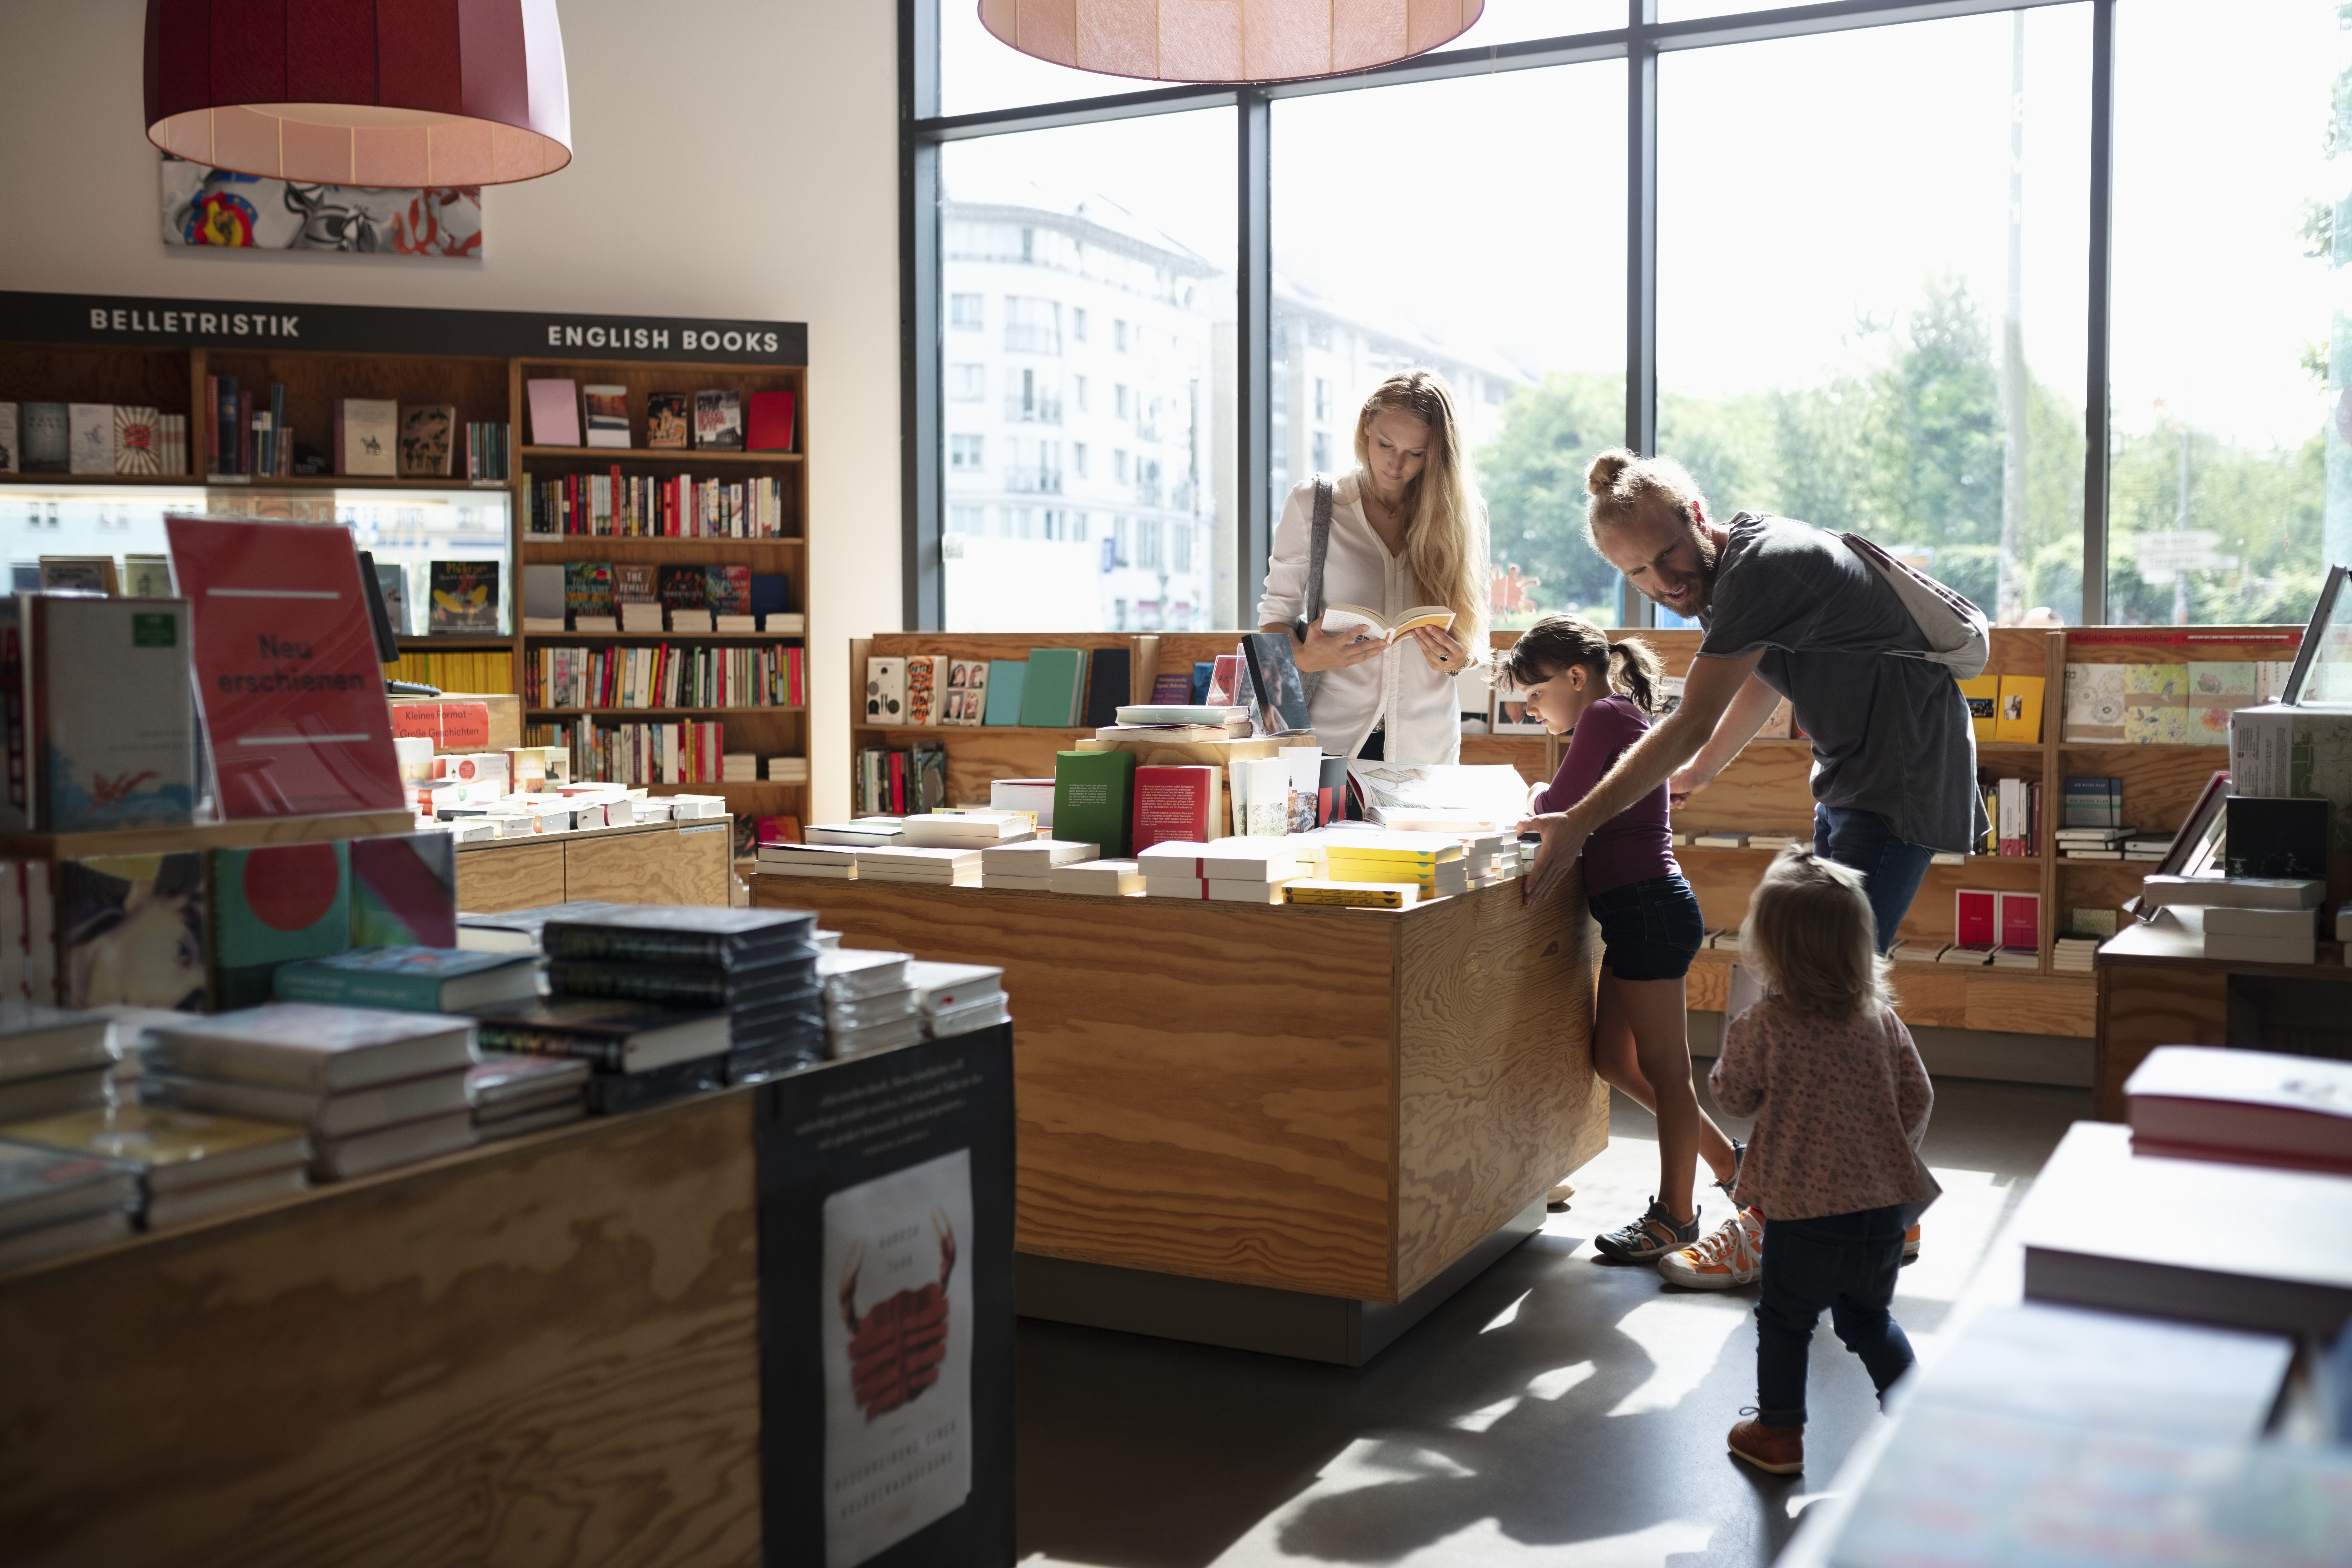 Family shopping in a bookstore. (Getty Images)